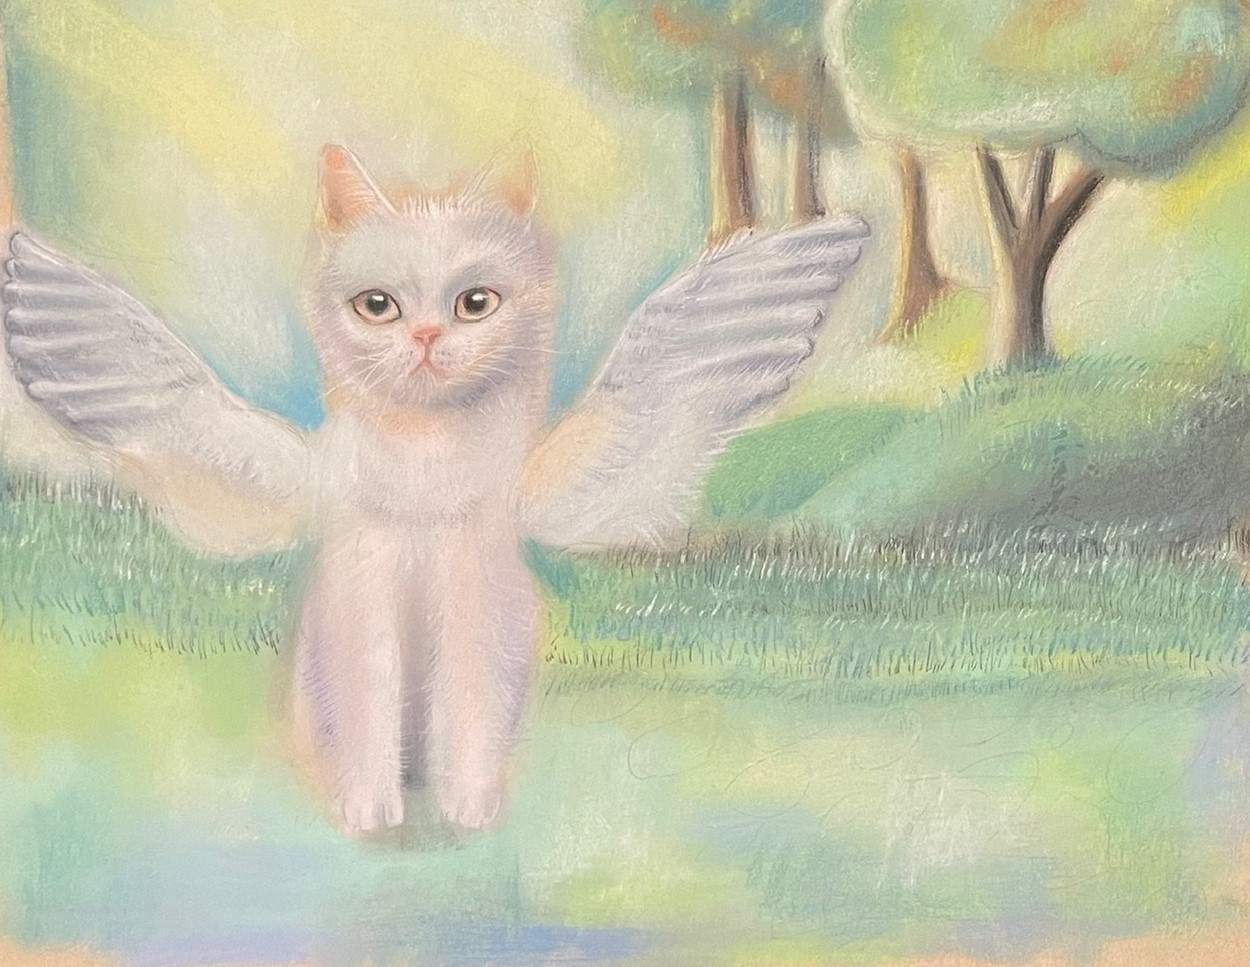 Drawing of a cat with wings - Young People of Bayside Art Awards 2023 - Abby P 10 to 13 year old winner